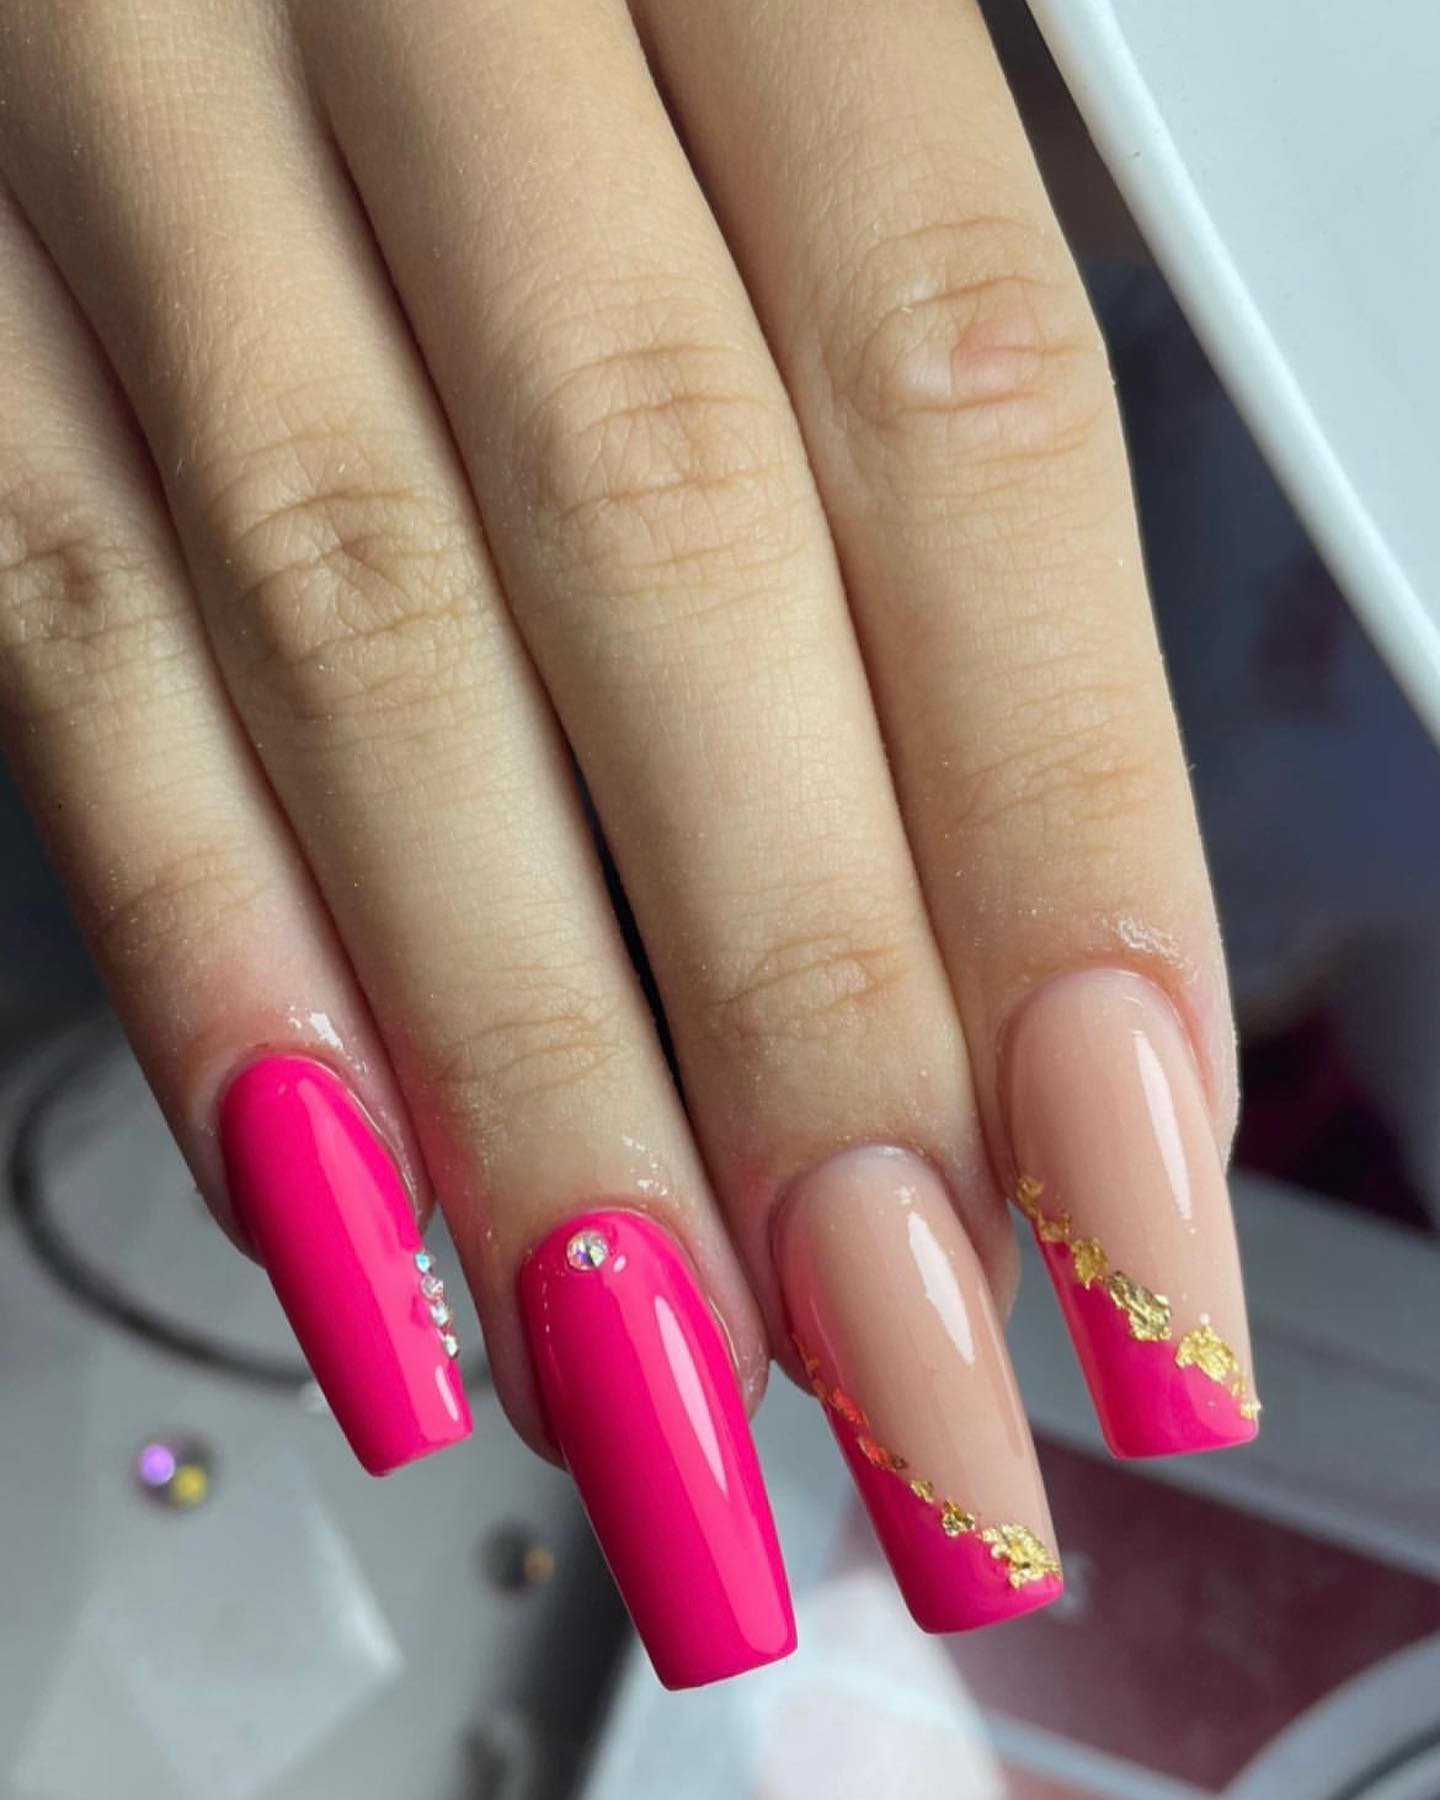 Gold and pink can look so heavenly when paired the right way. Want to try out this classy color combo?